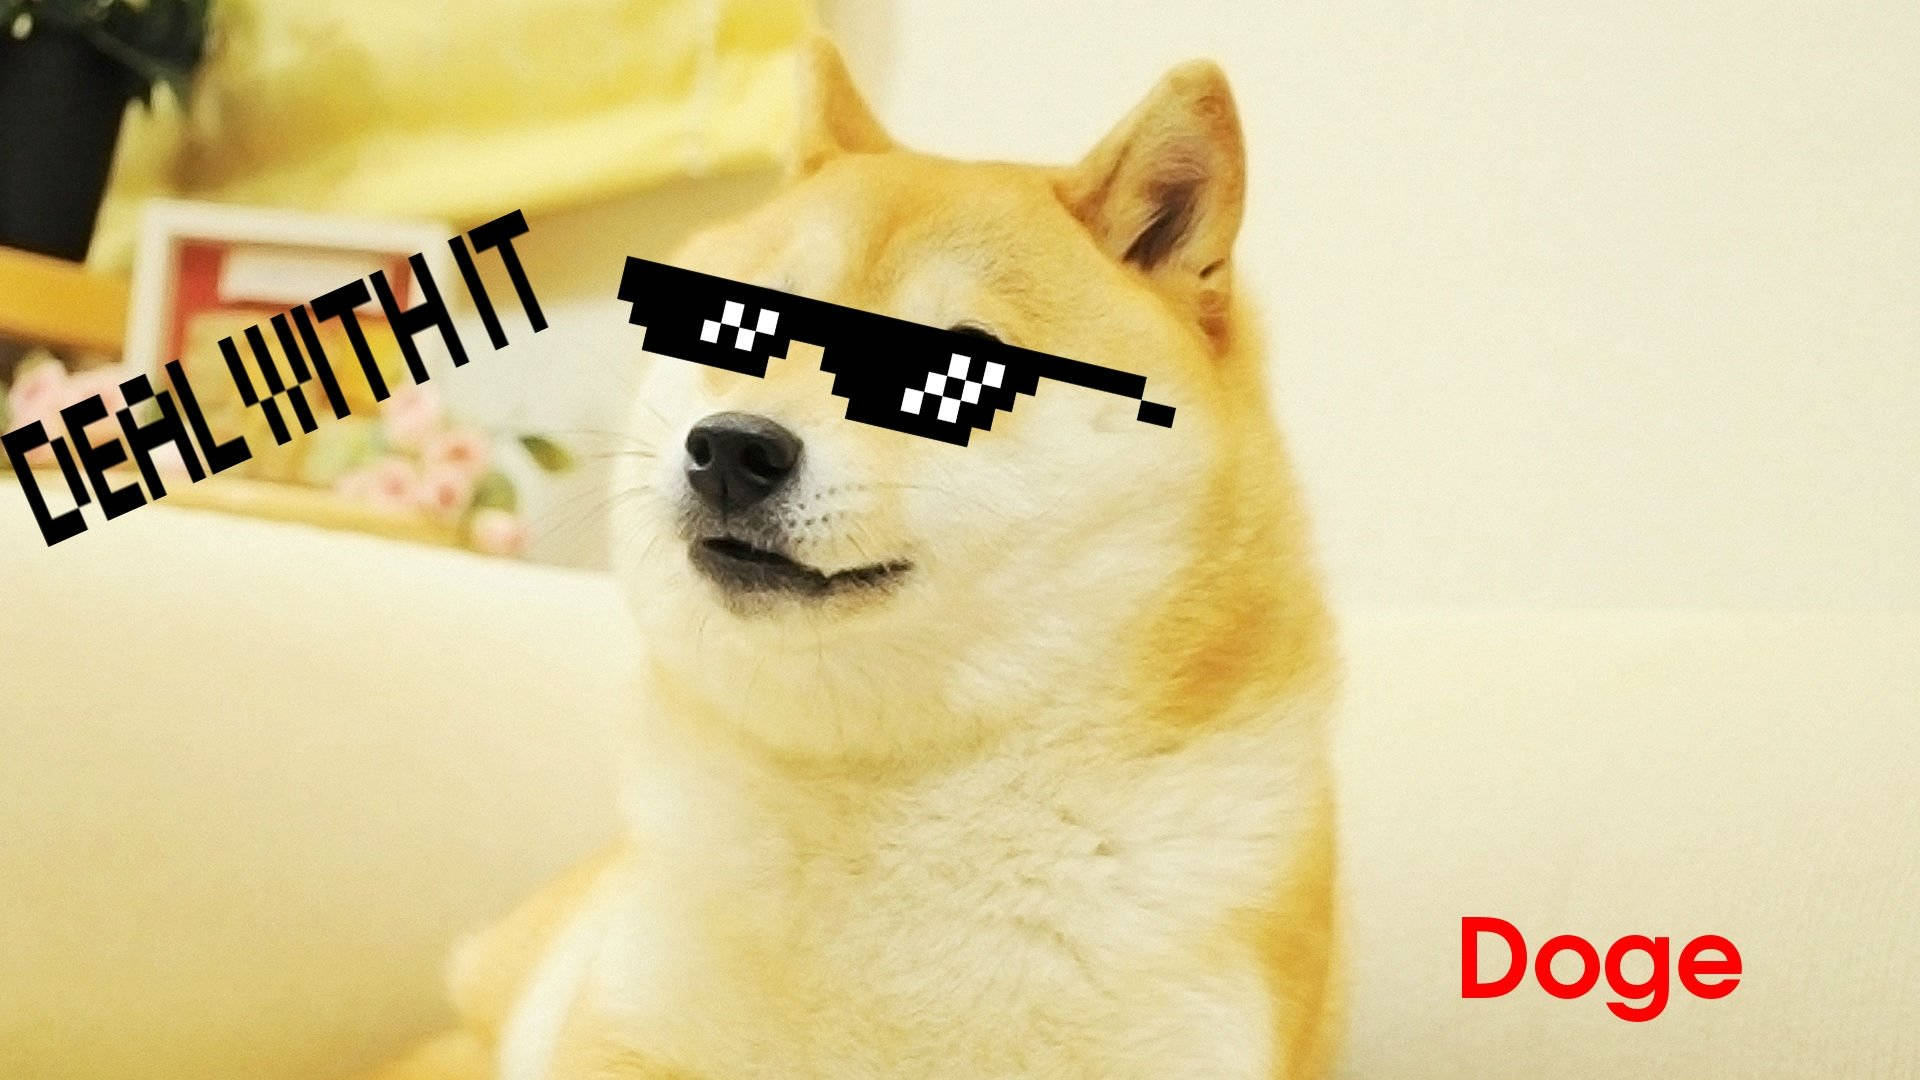 Deal With It! Wallpaper